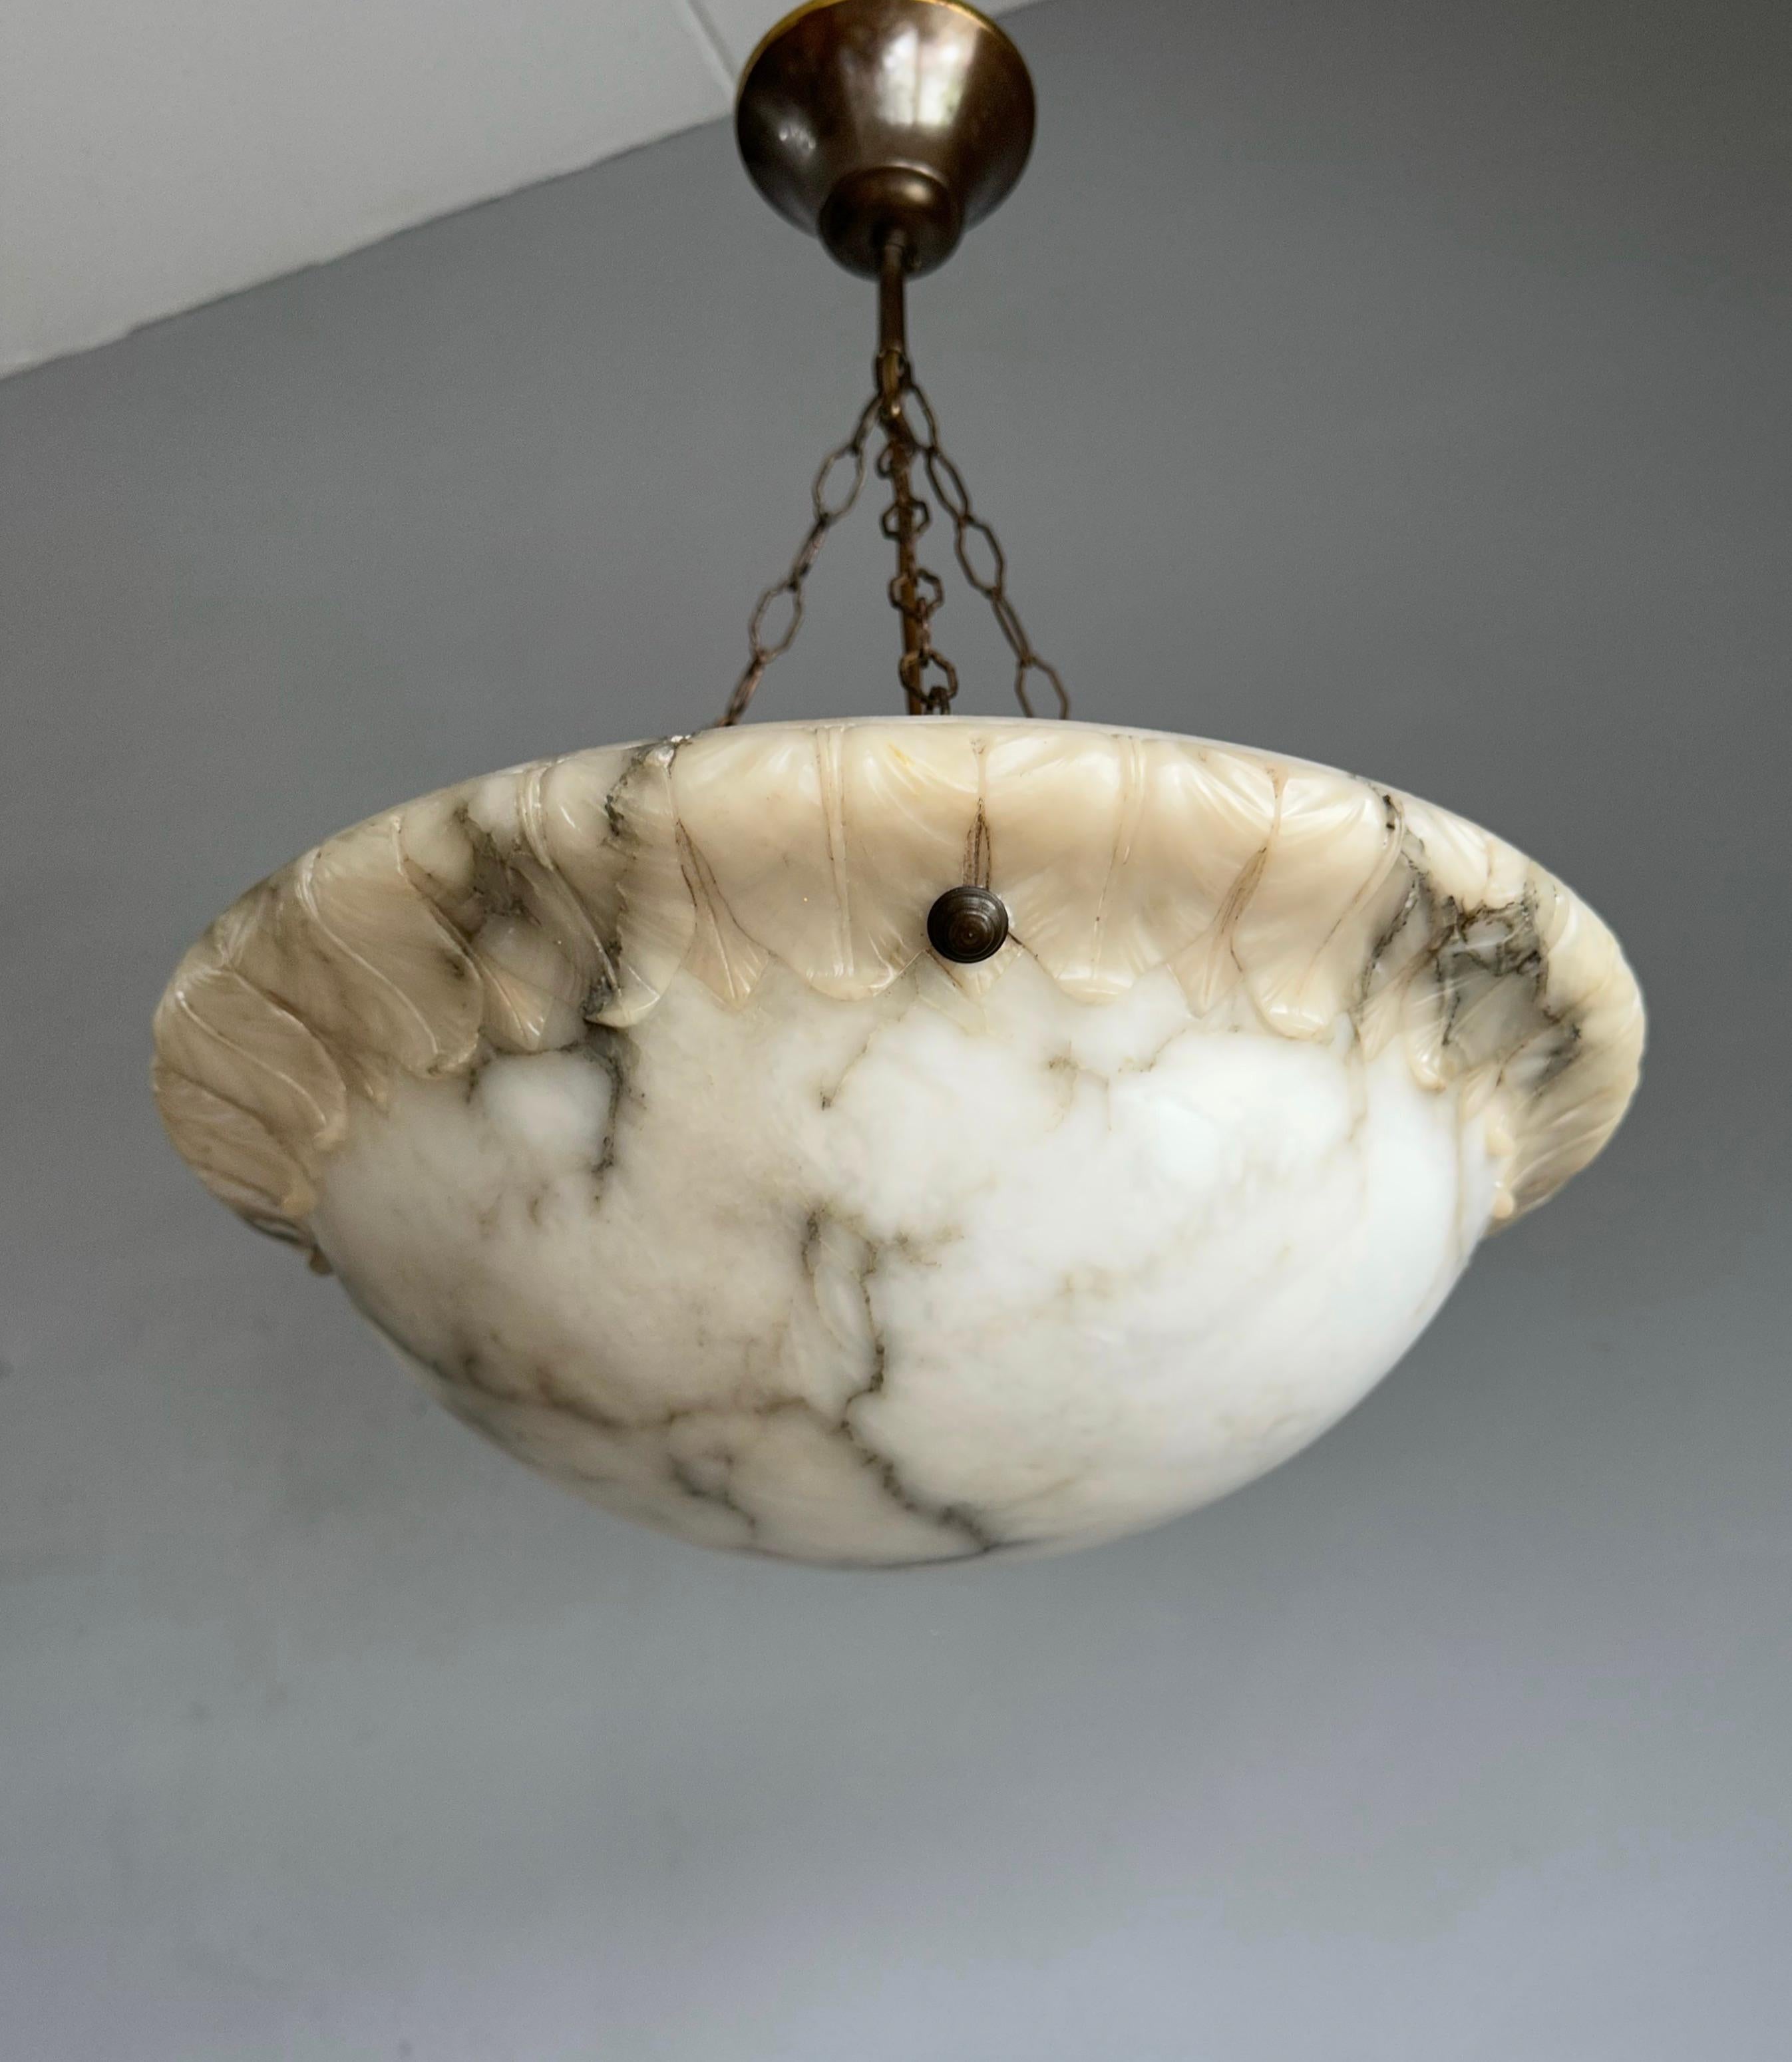 Great Looking Antique and Mint Condition White & Black Alabaster Pendant Light 5